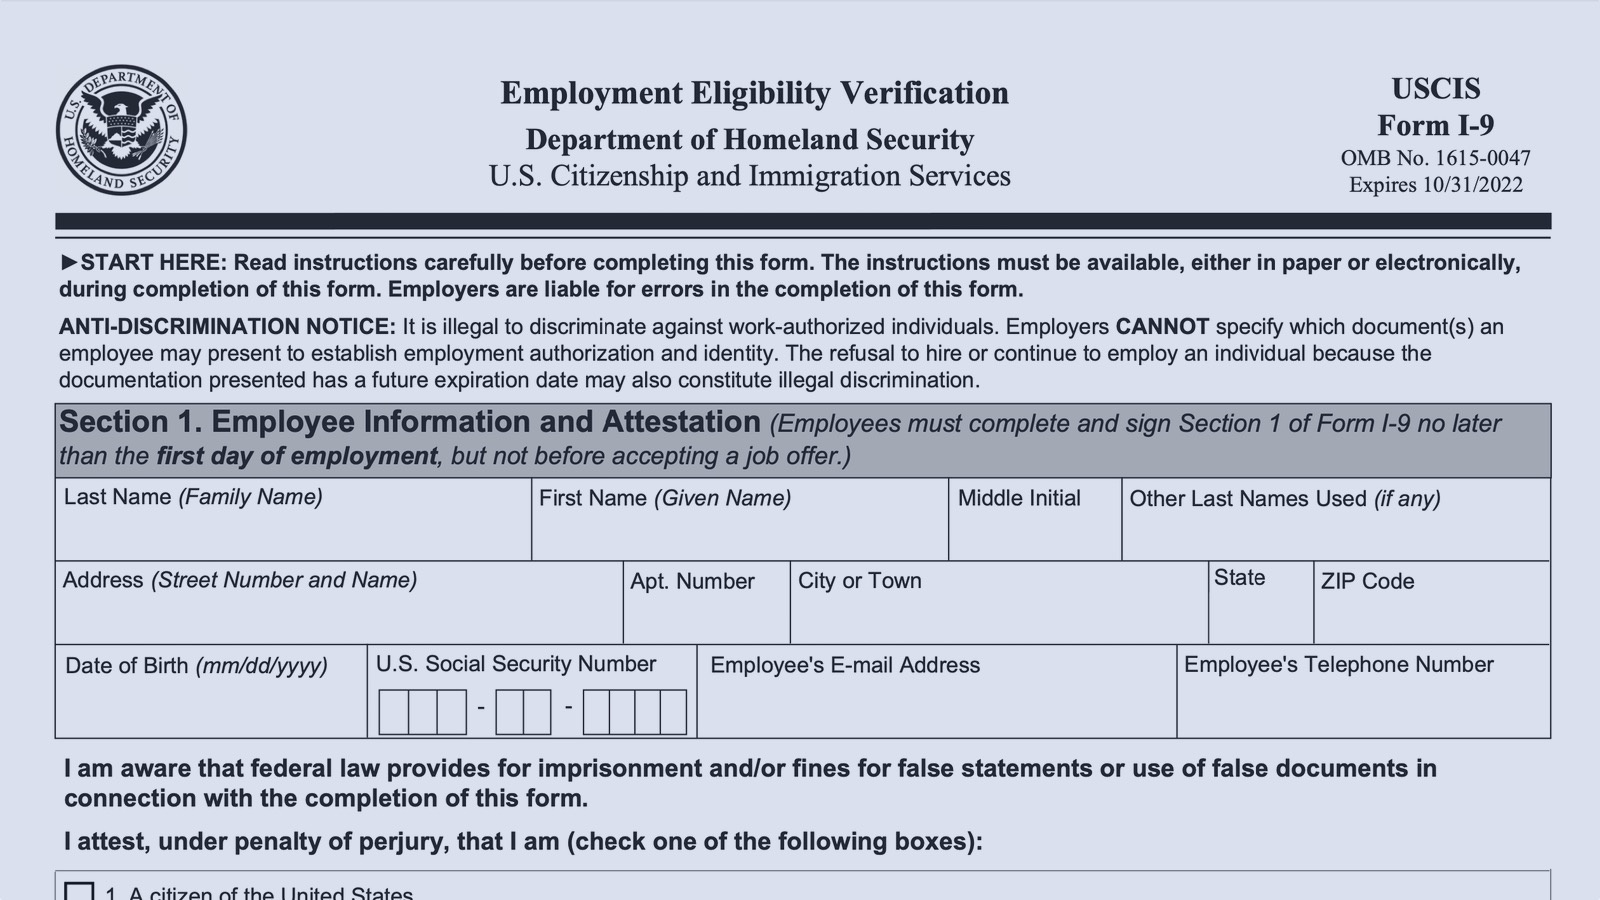 Uscis And Dhs Announces Revisions To Form I-9 And Remote intended for USCIS I-9 Form